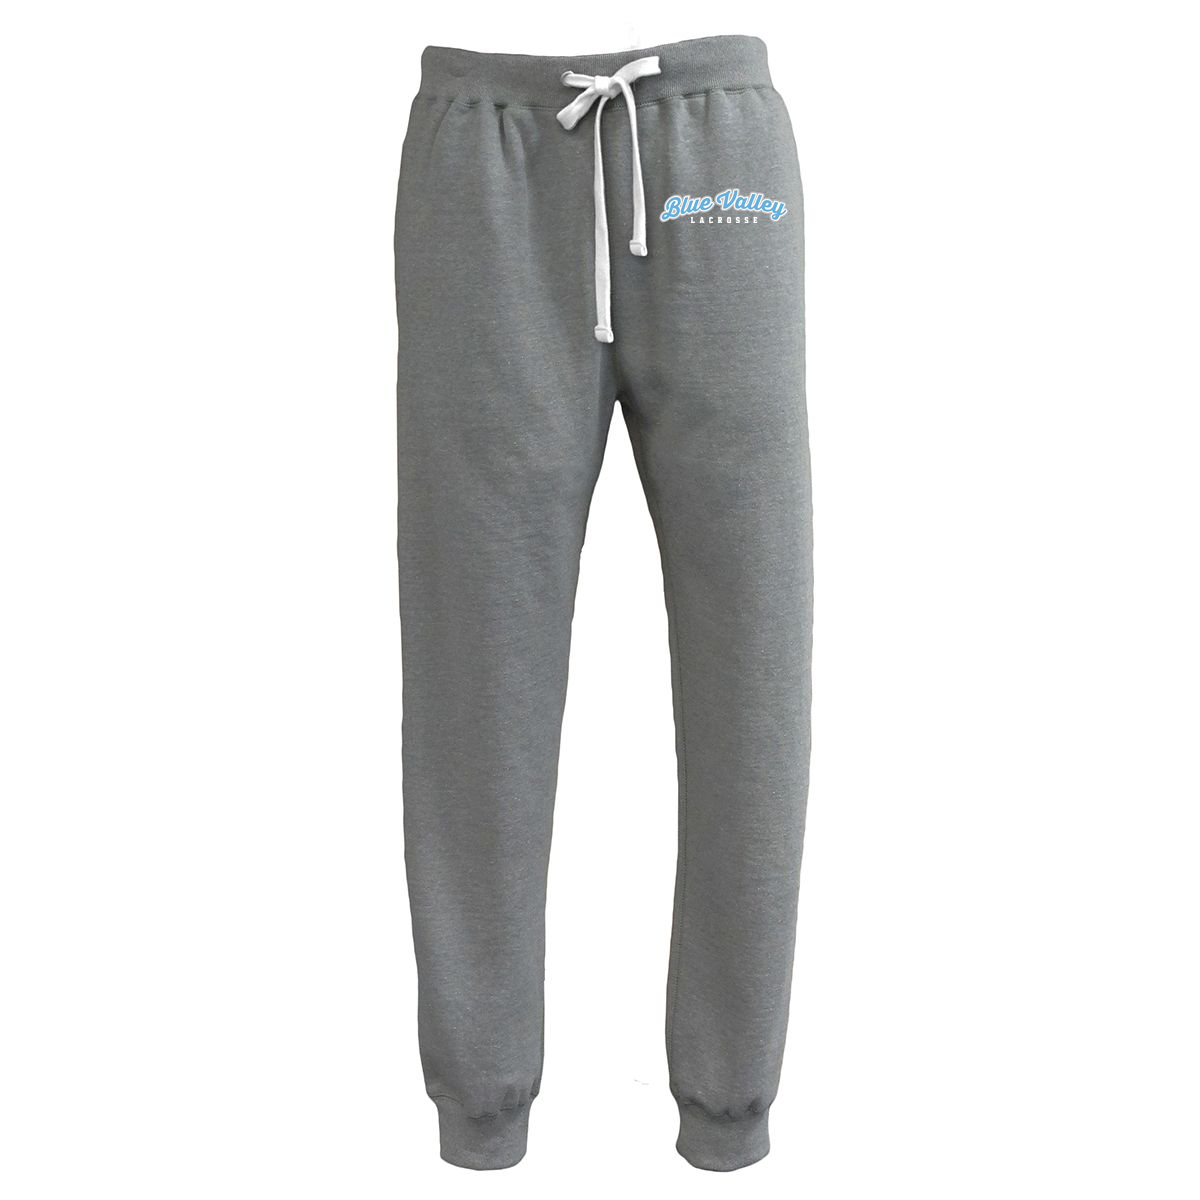 Blue Valley Spartans Joggers